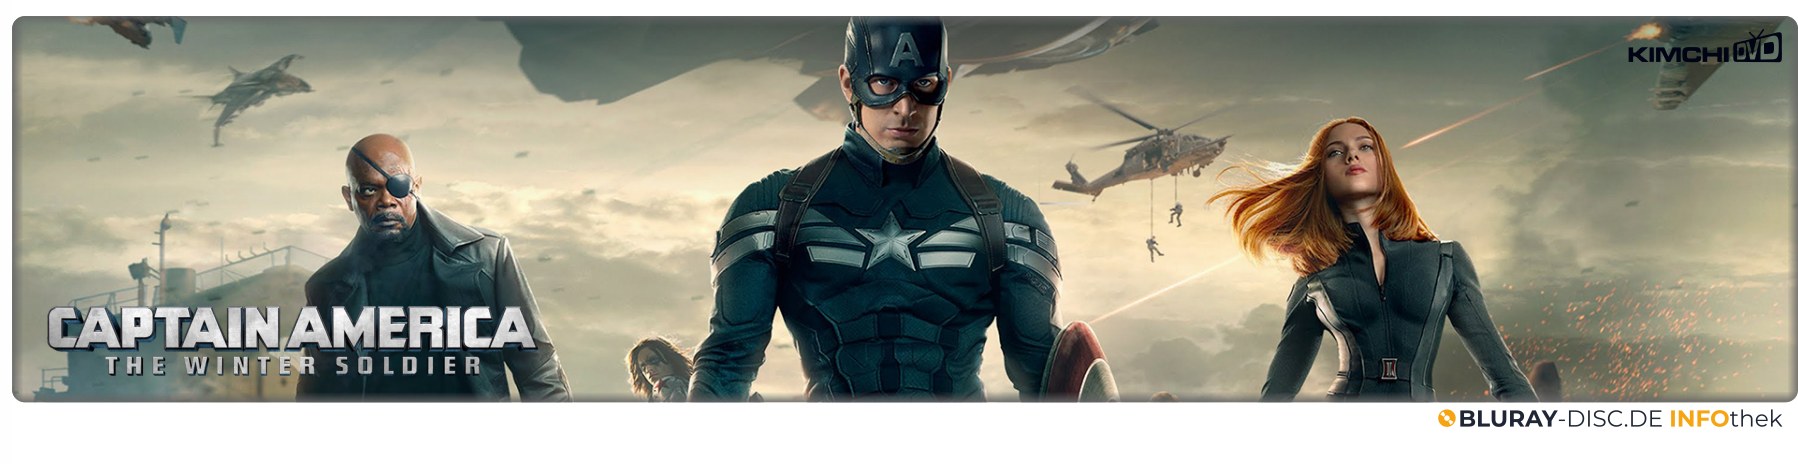 Captain_America_-_The_Winter_Soldier.png